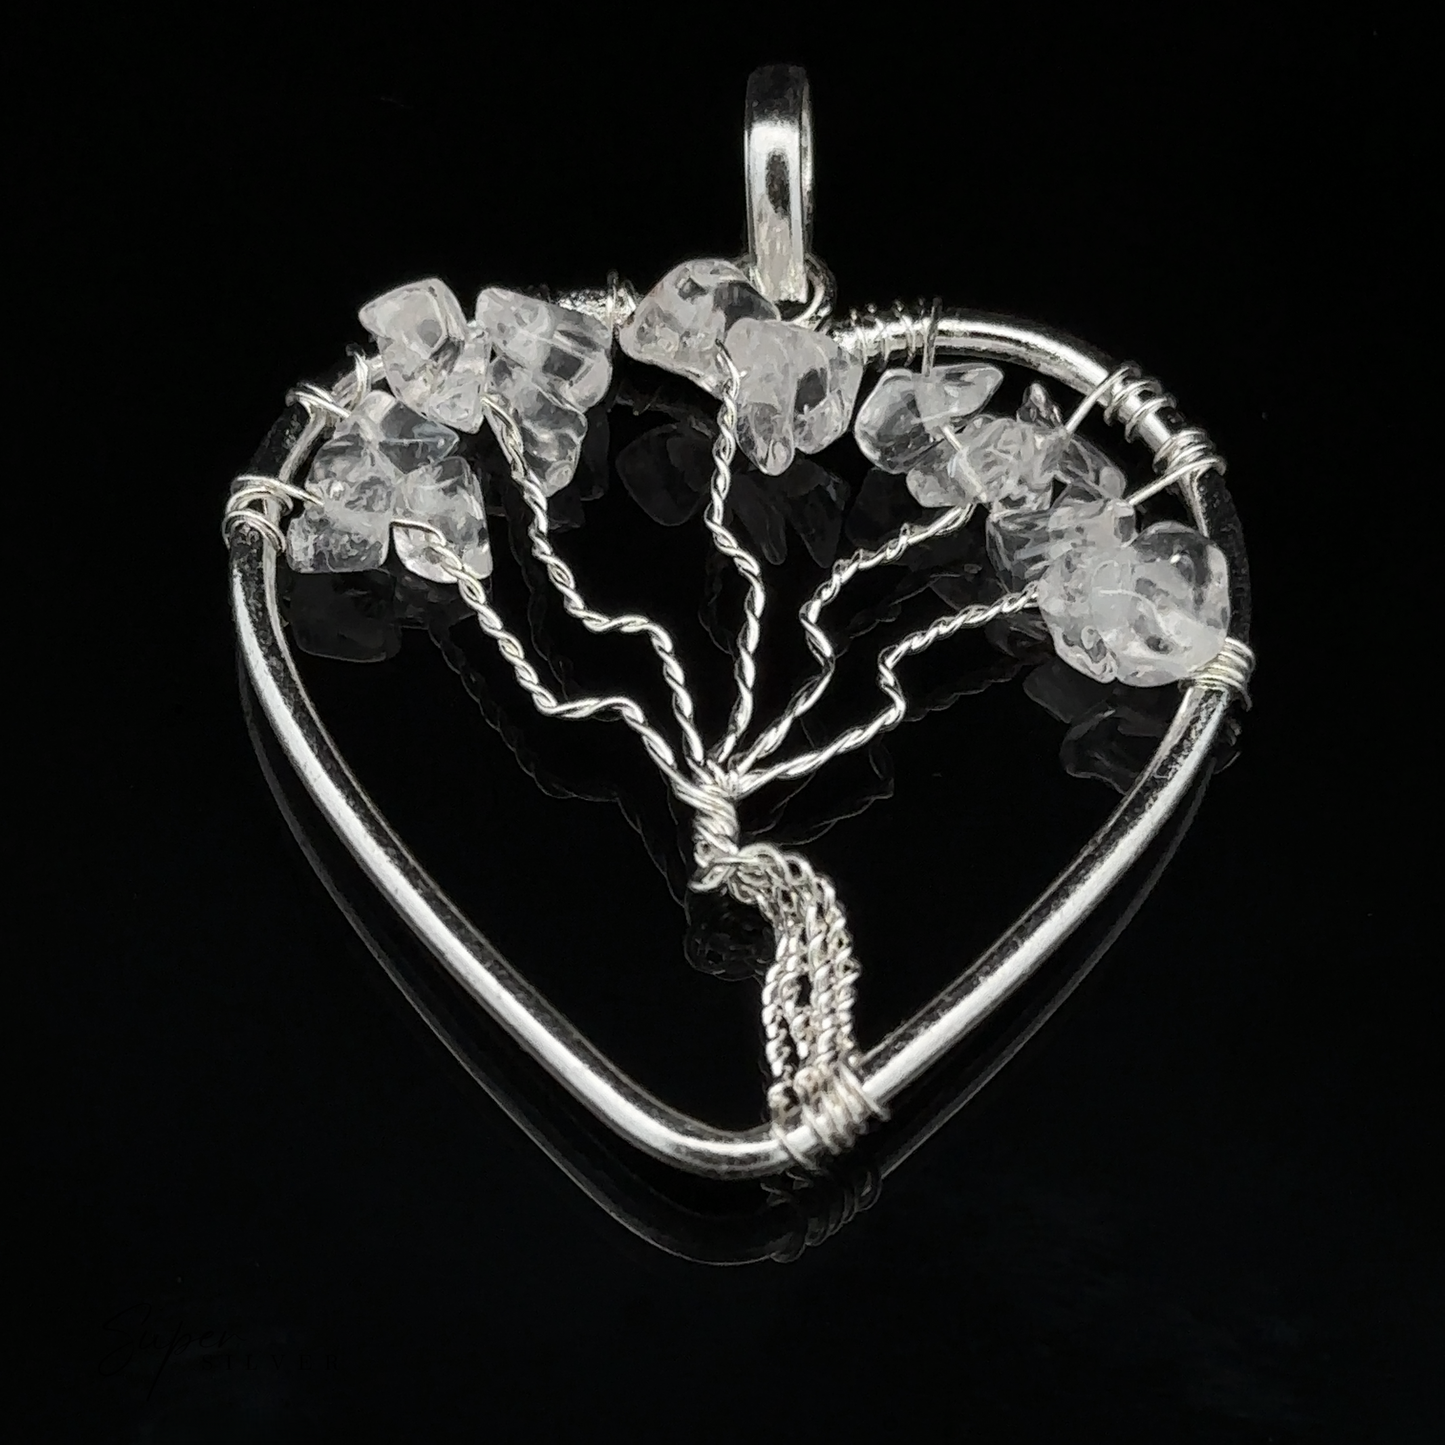 
                  
                    A Heart Shaped Tree of Life Pendant featuring a wire-wrapped design adorned with small clear crystal stones against a black background.
                  
                